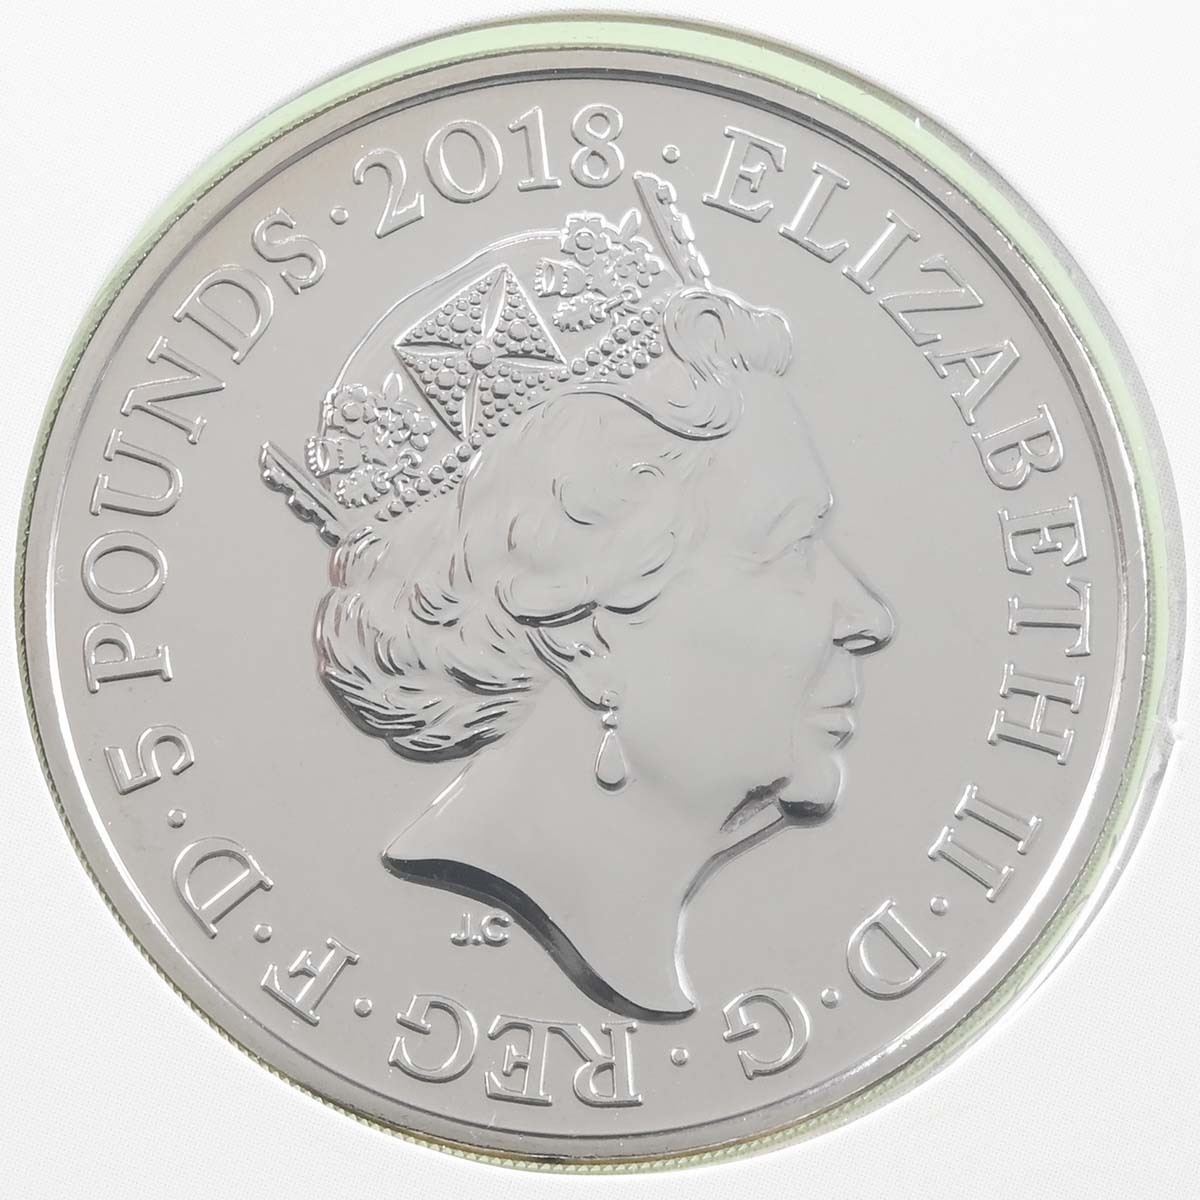 UK1870BU 2018 Charles Prince Of Wales 70th Birthday Five Pound Crown Brilliant Uncirculated Coin In Folder Obverse